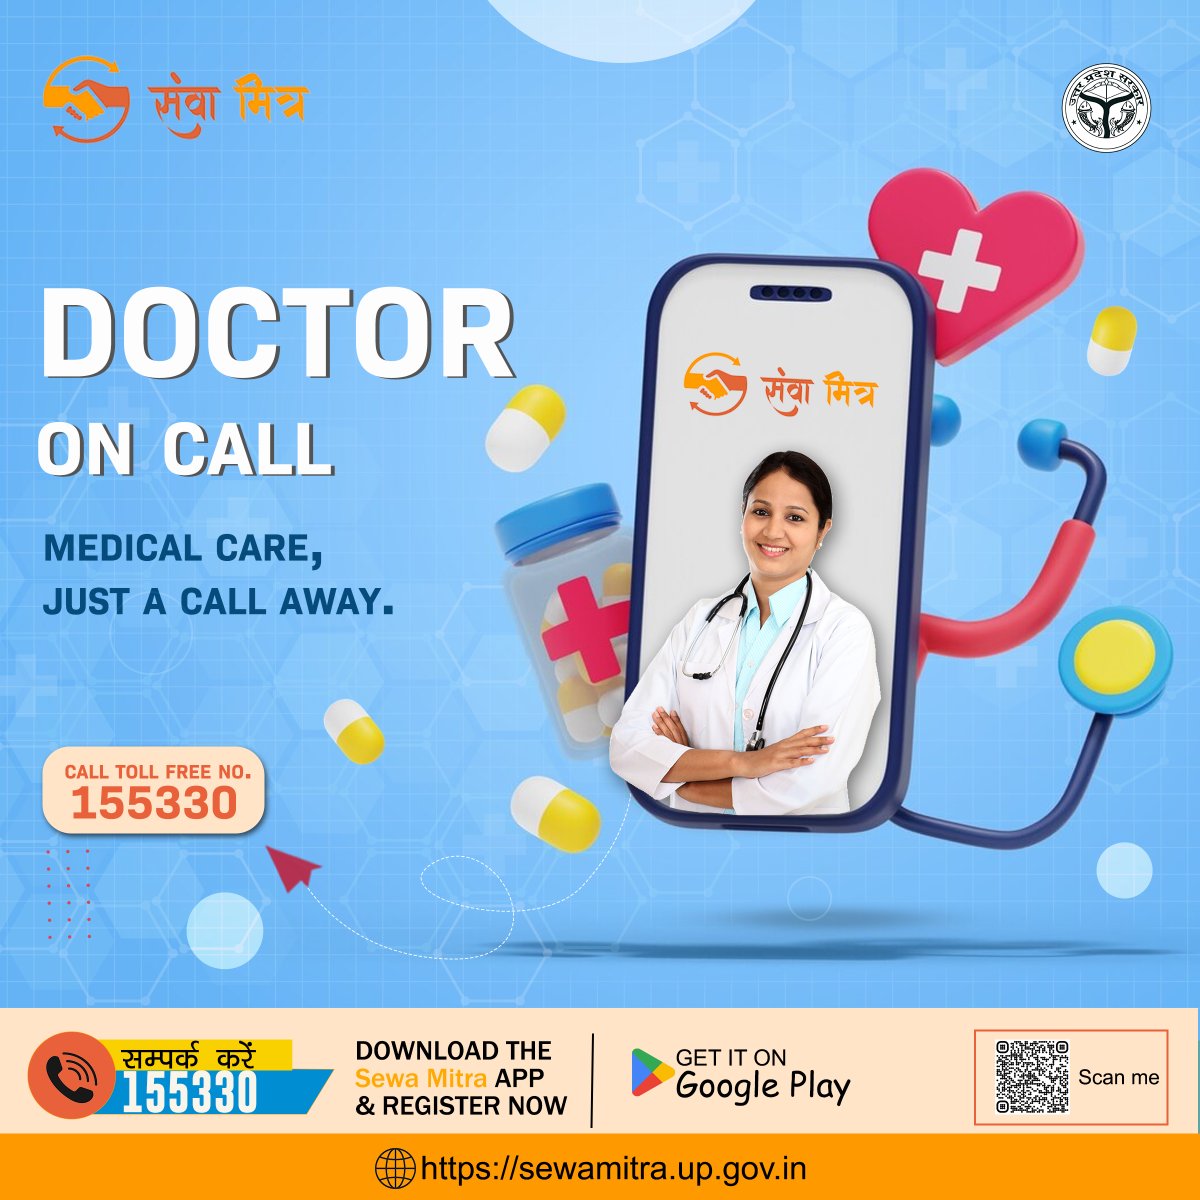 Urgent medical issue? Call 155330! Our Doctor on Call service brings medical expertise to your doorstep whenever you need it! 🚑

#doctoroncall #onlinedoctor #consultdoctor #telemedicine #healthcare #medicalcare #247care #sewamitra #sewamitraservices